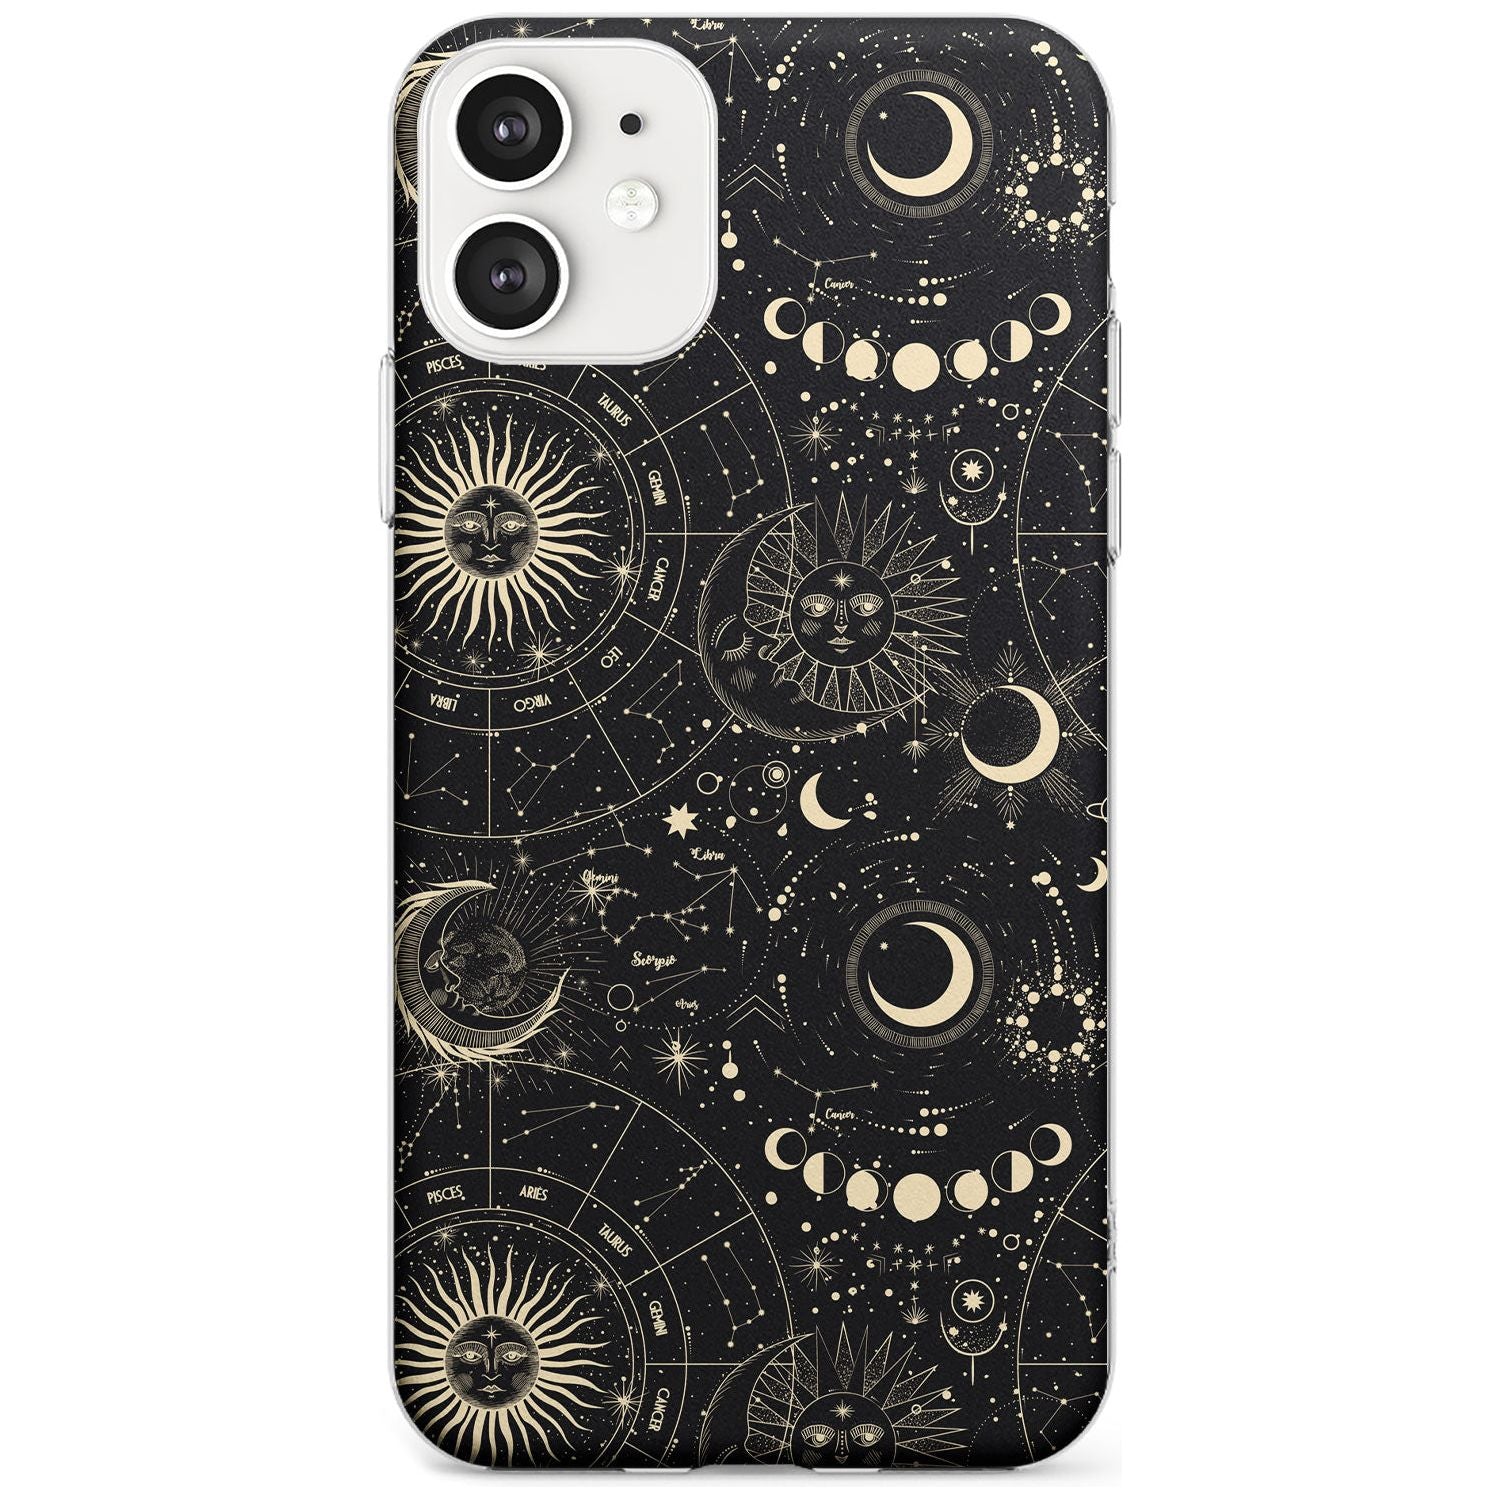 Suns, Moons & Star Signs Black Impact Phone Case for iPhone 11